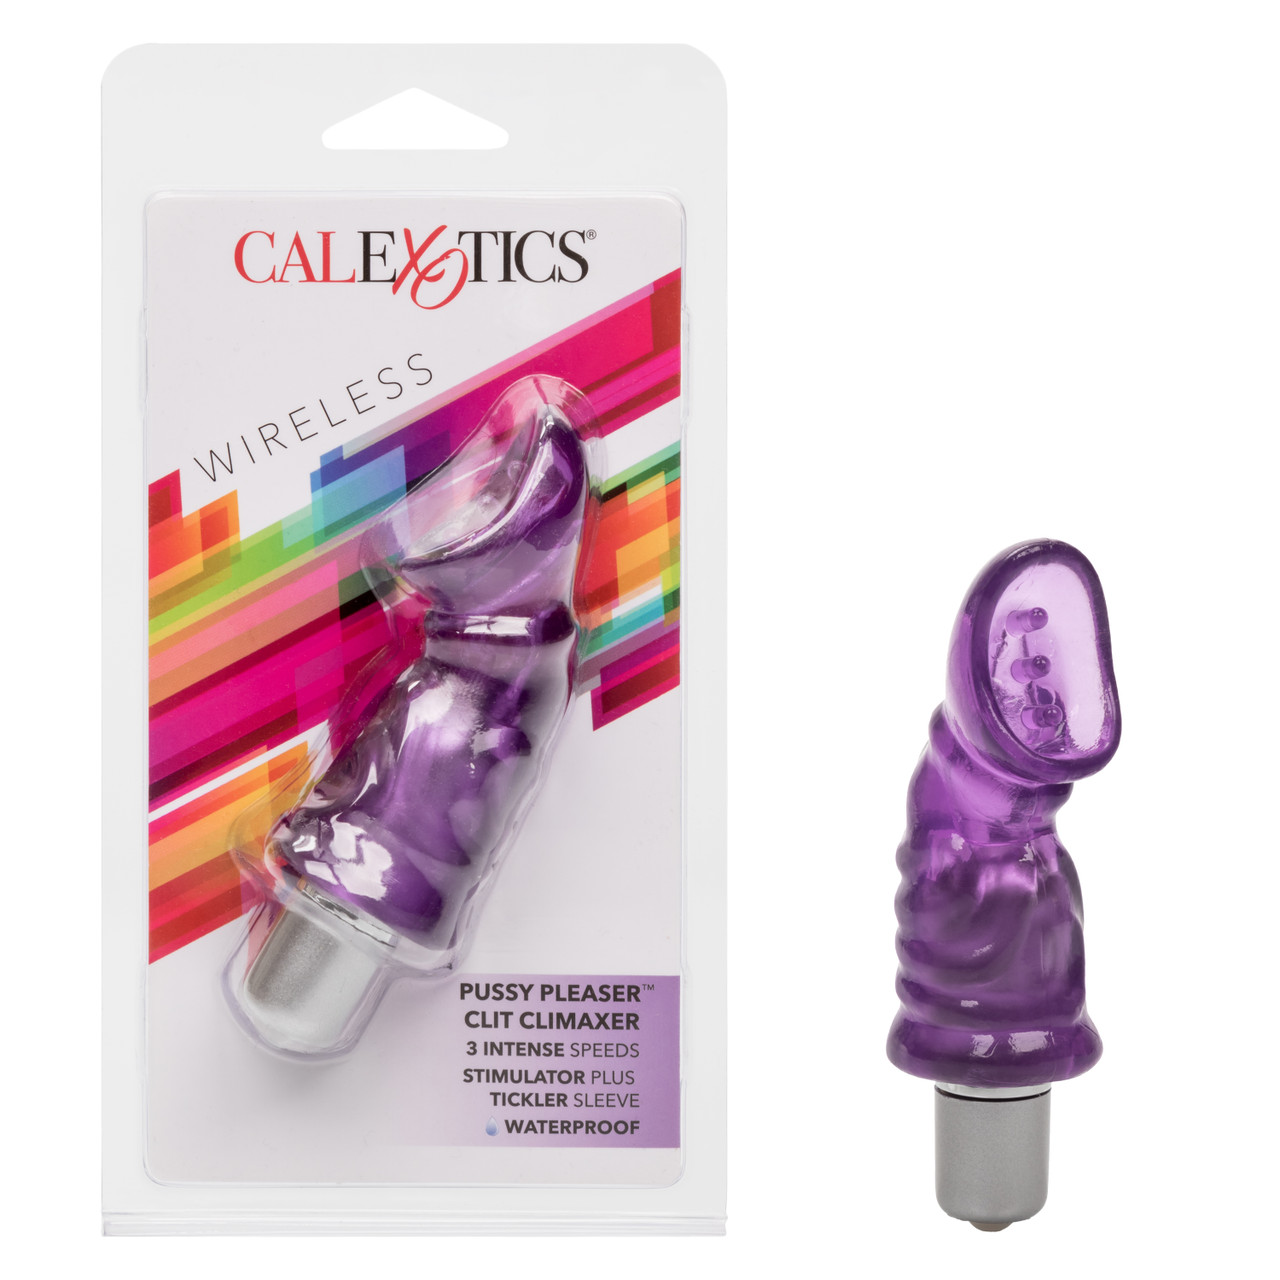 PUSSY PLEASER WIRELESS CLIT CLIMAXER